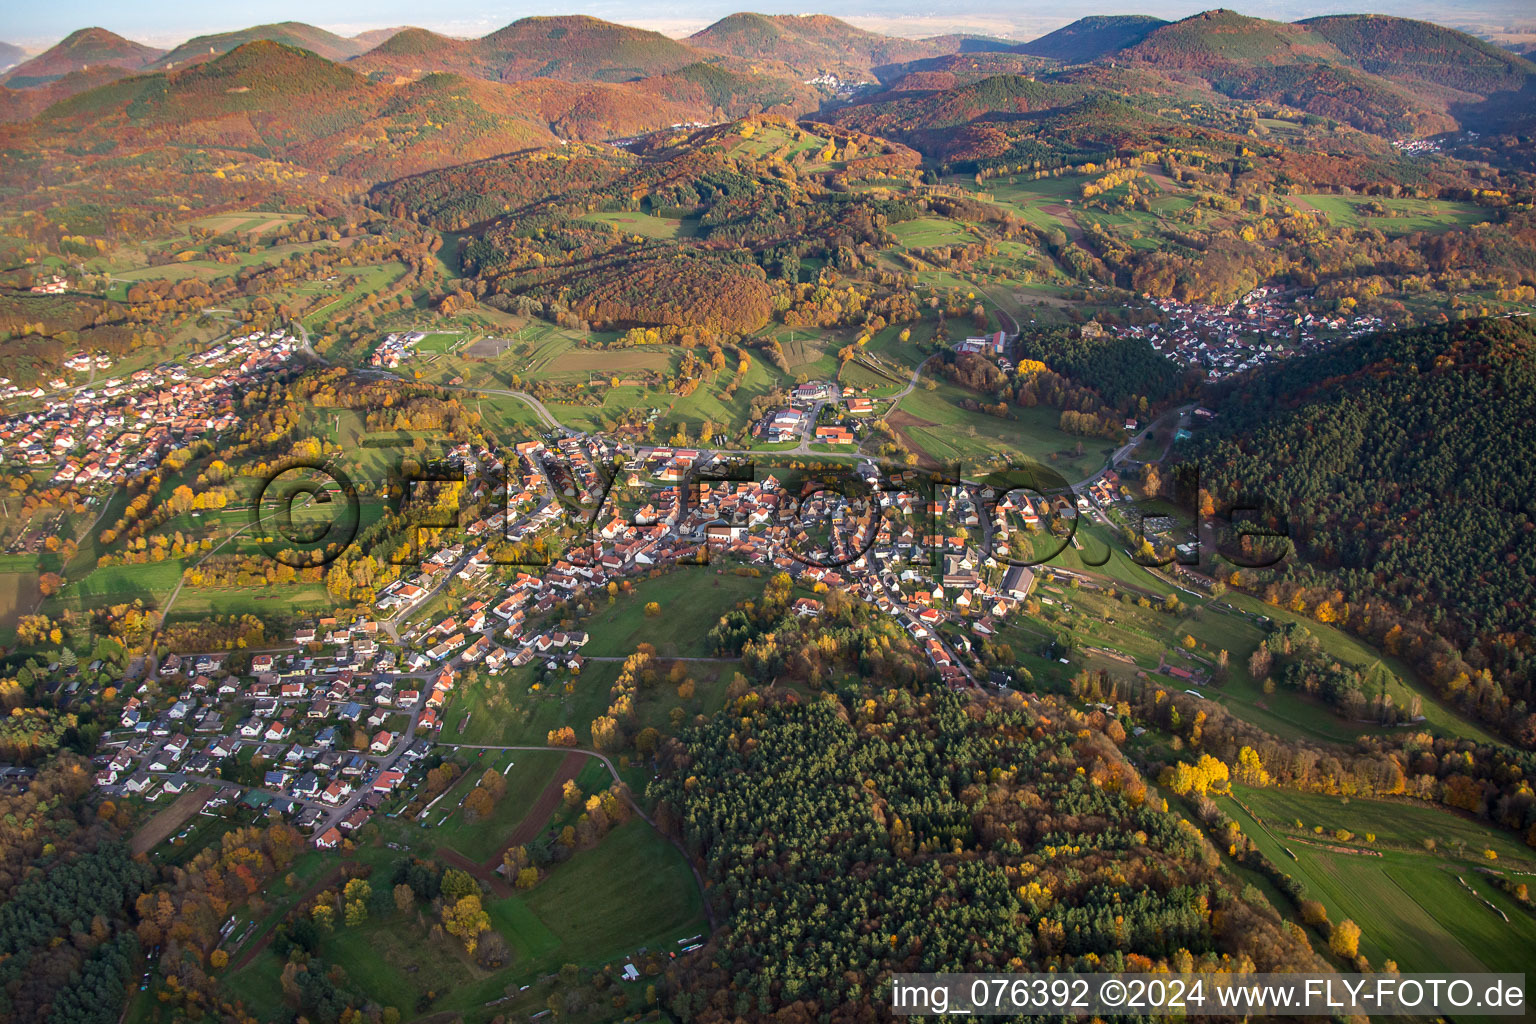 Aerial view of District Gossersweiler in Gossersweiler-Stein in the state Rhineland-Palatinate, Germany